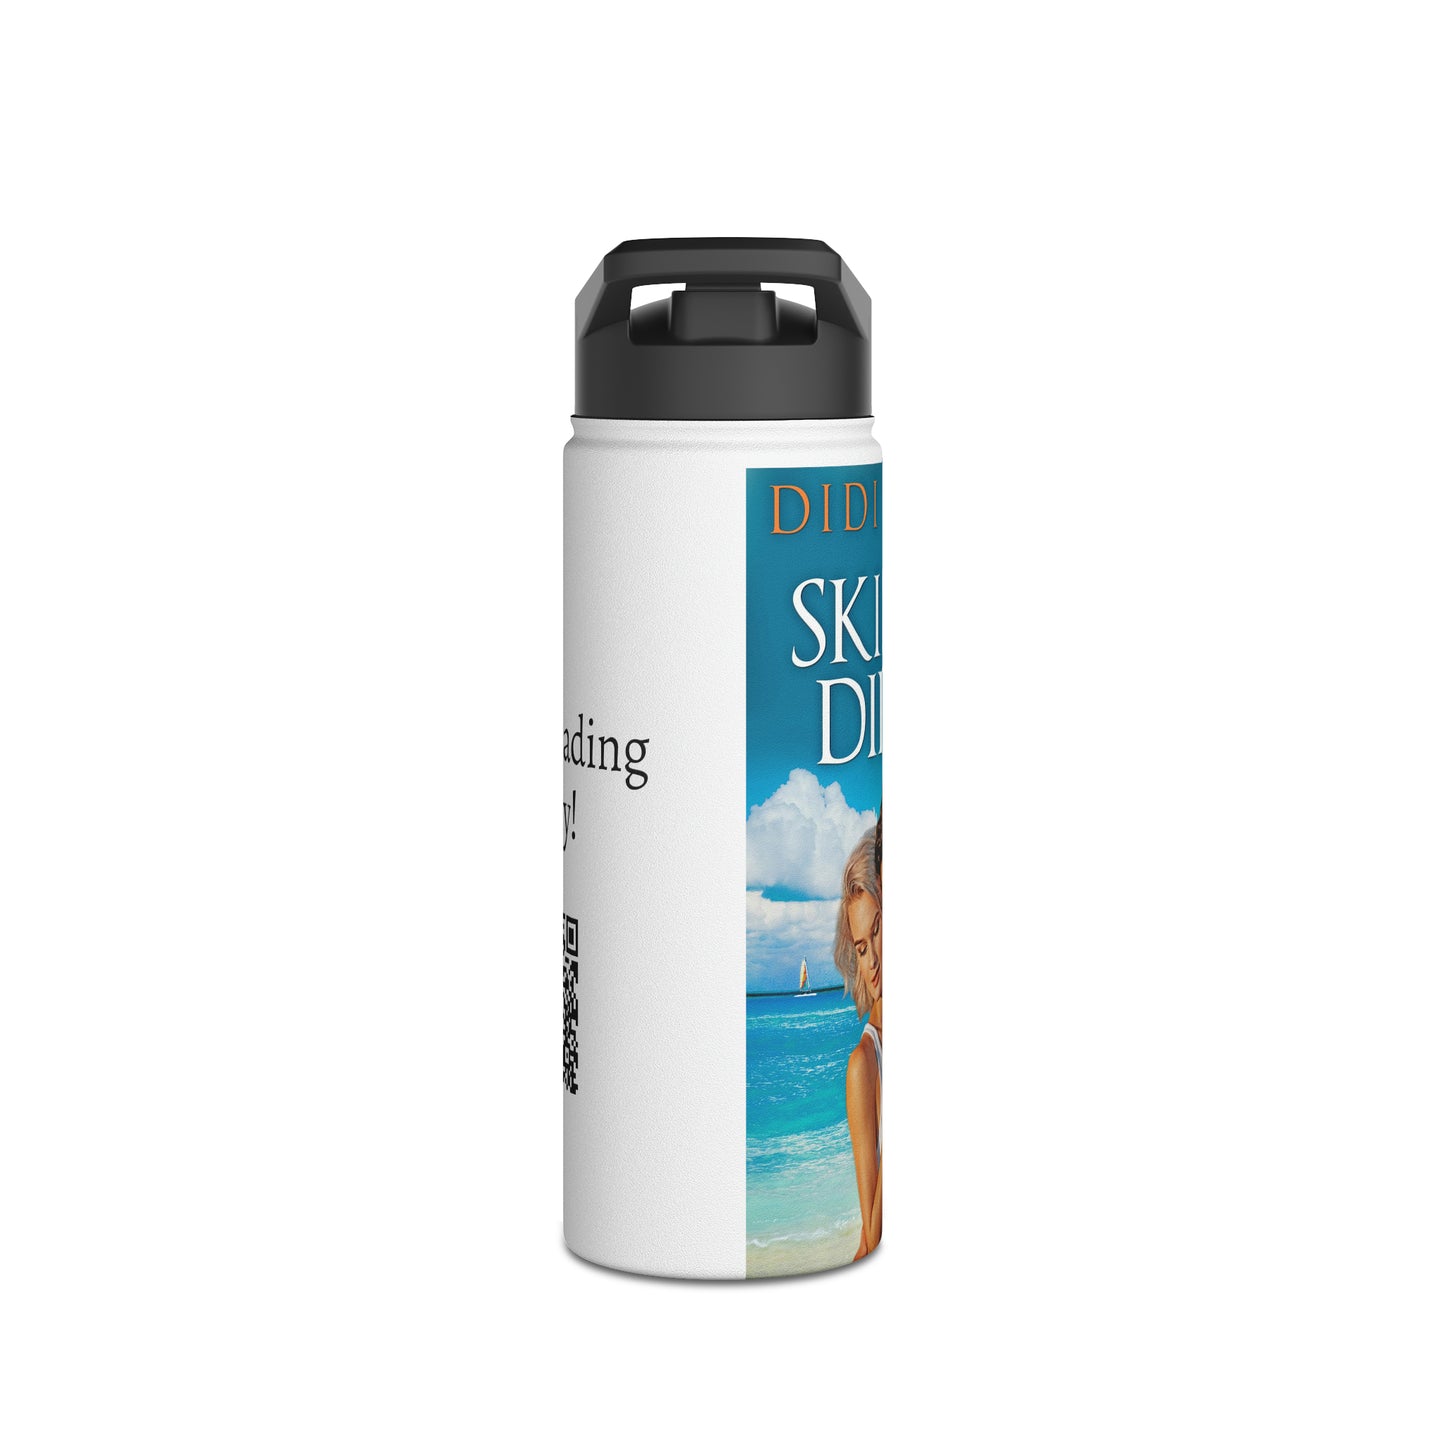 Skinny Dippin' - Stainless Steel Water Bottle